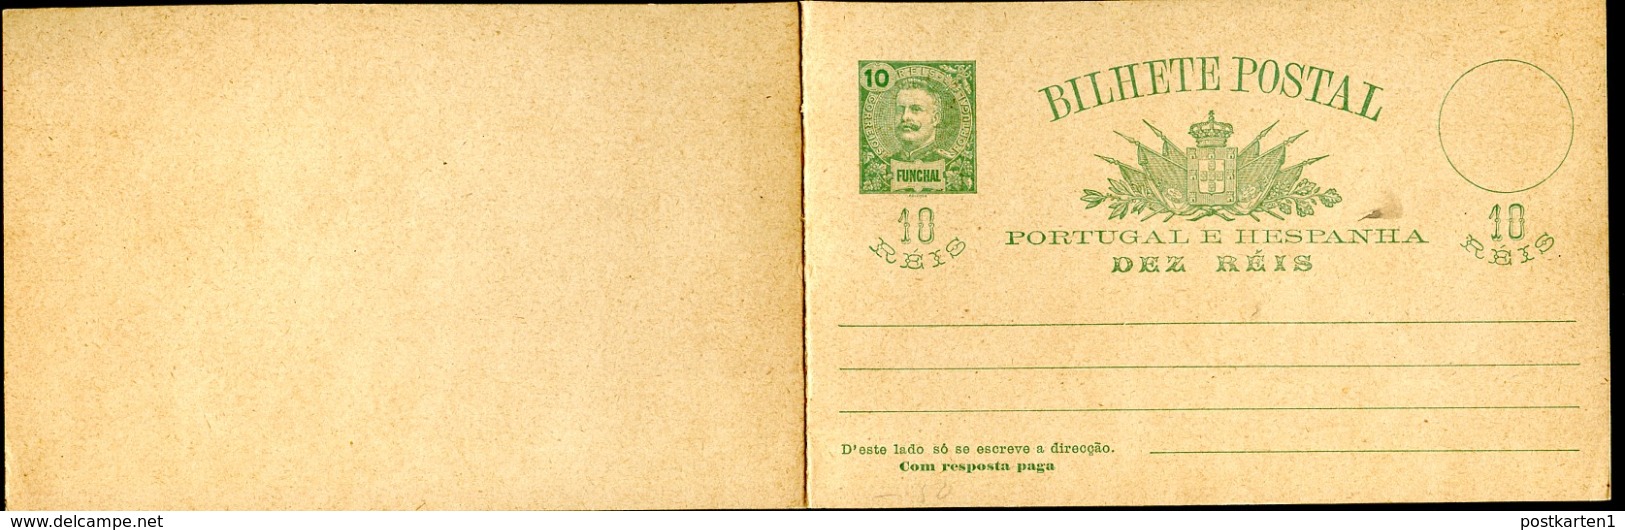 FUNCHAL Postal Card With Reply #10  10+10 Reis Mint 1897 - Funchal